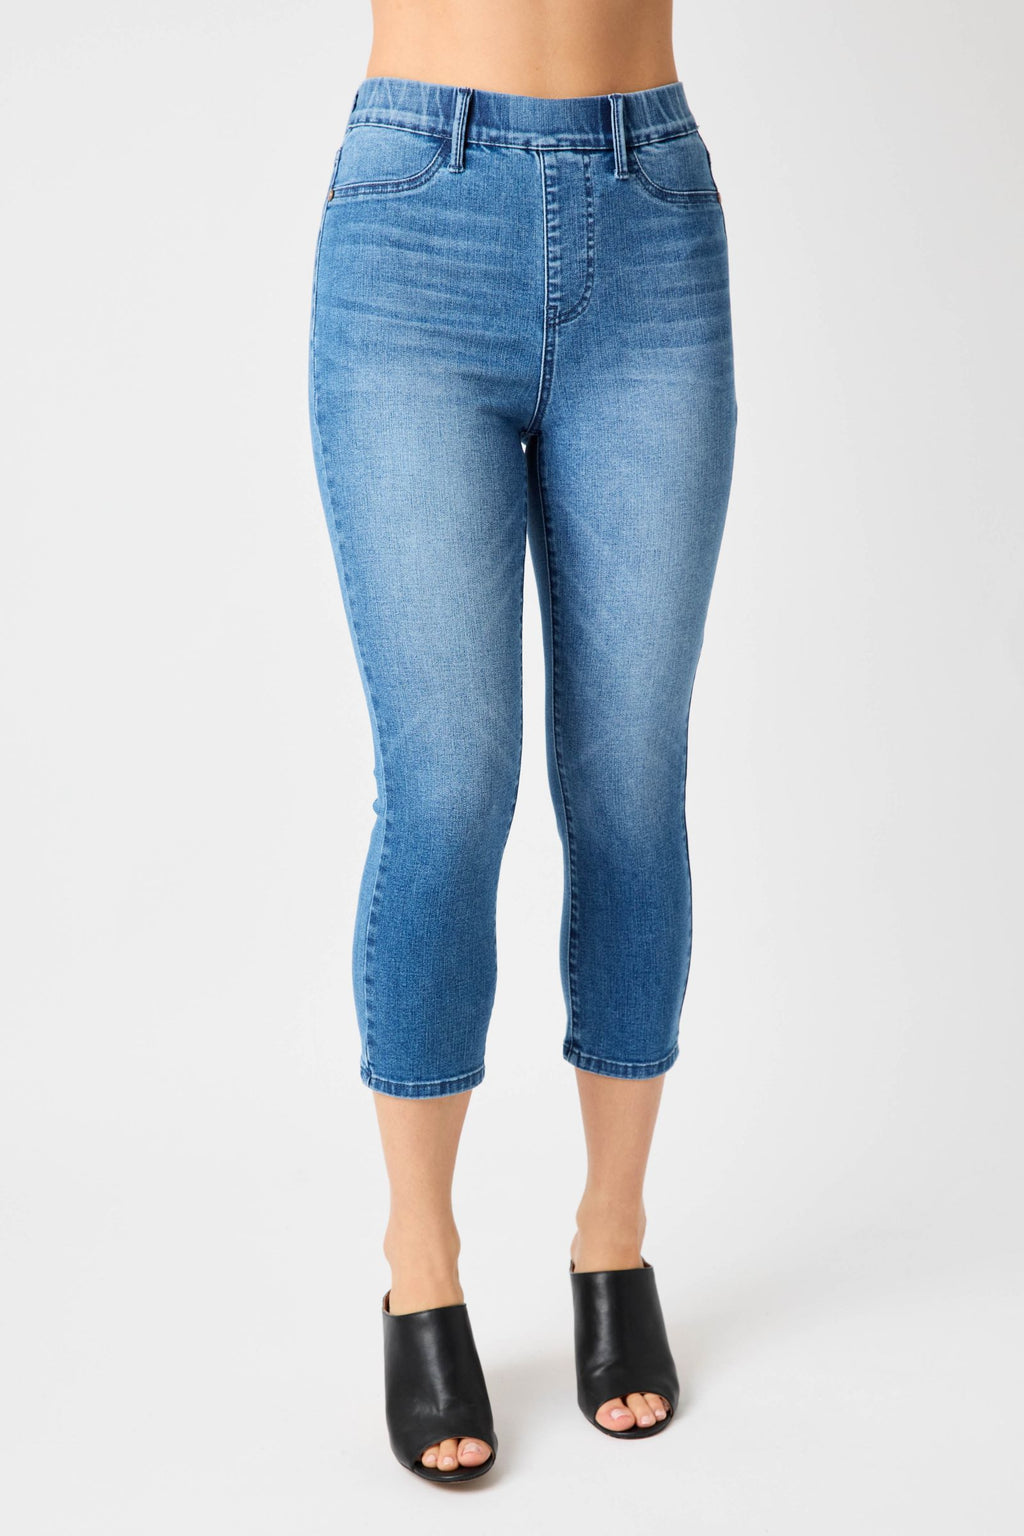 Judy Blue Mid-Rise Destroy Pull-On Skinny Jeggings (24) Blue at   Women's Jeans store